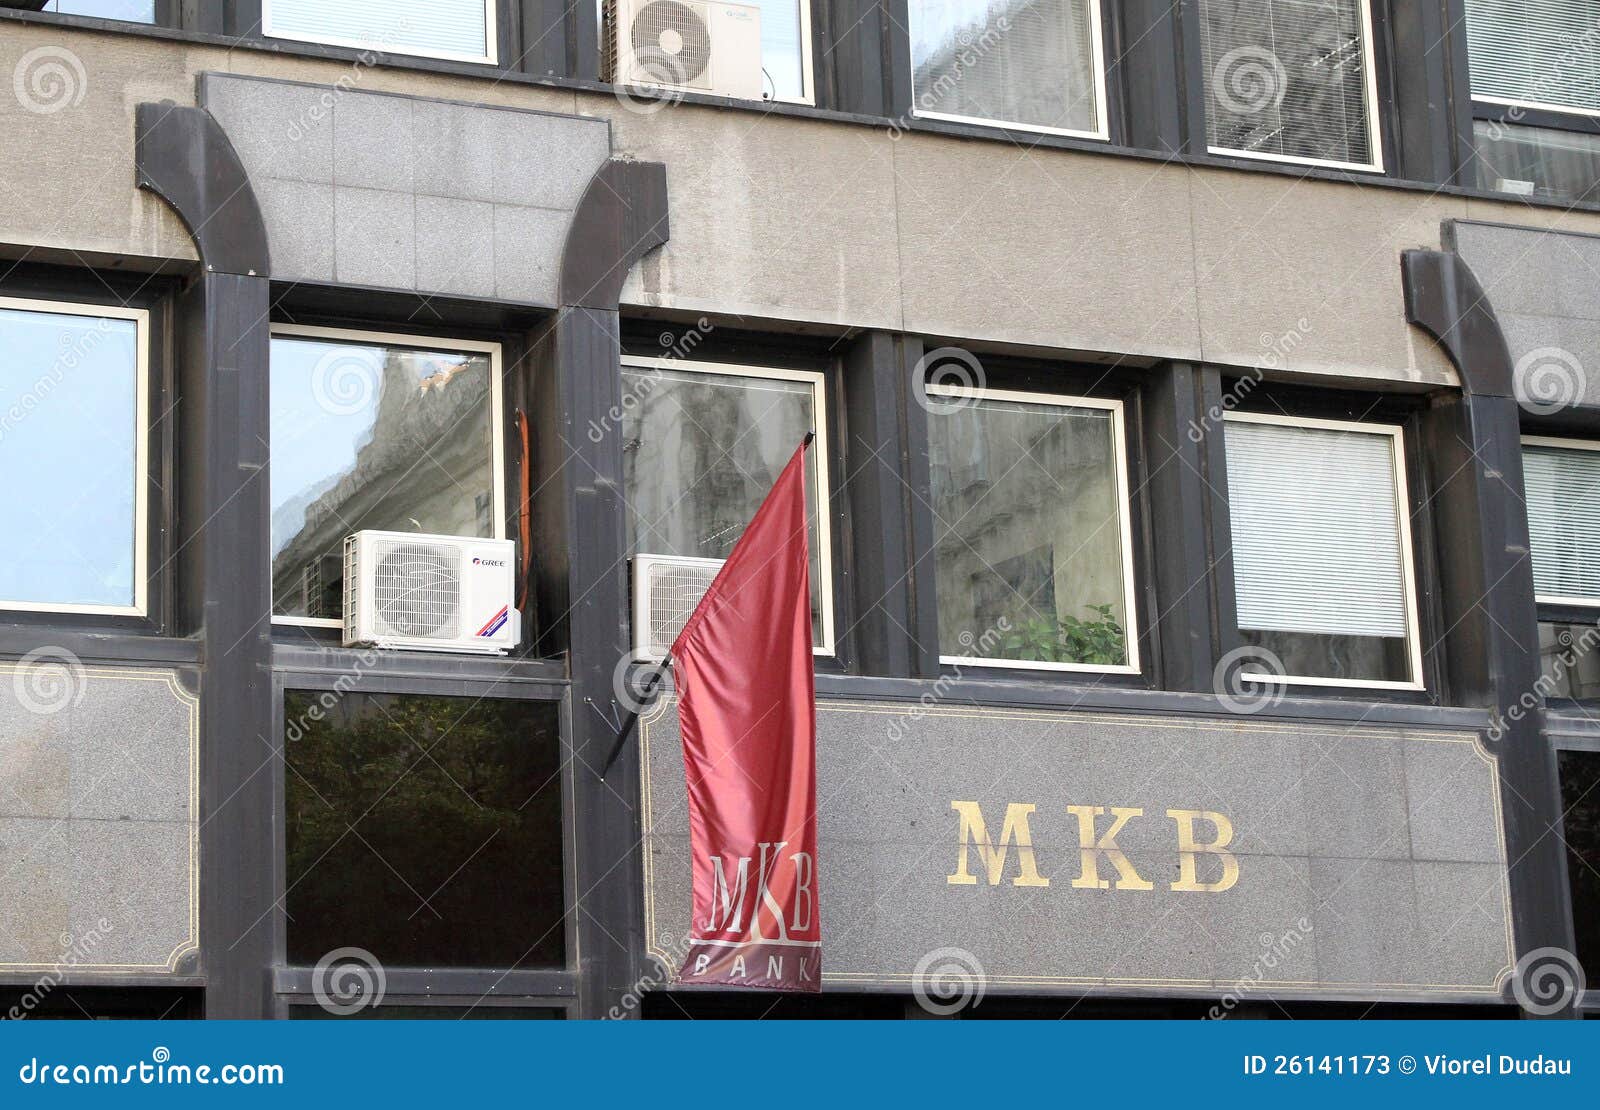 Report State To Merge Budapest Bank Mkb The Budapest Business